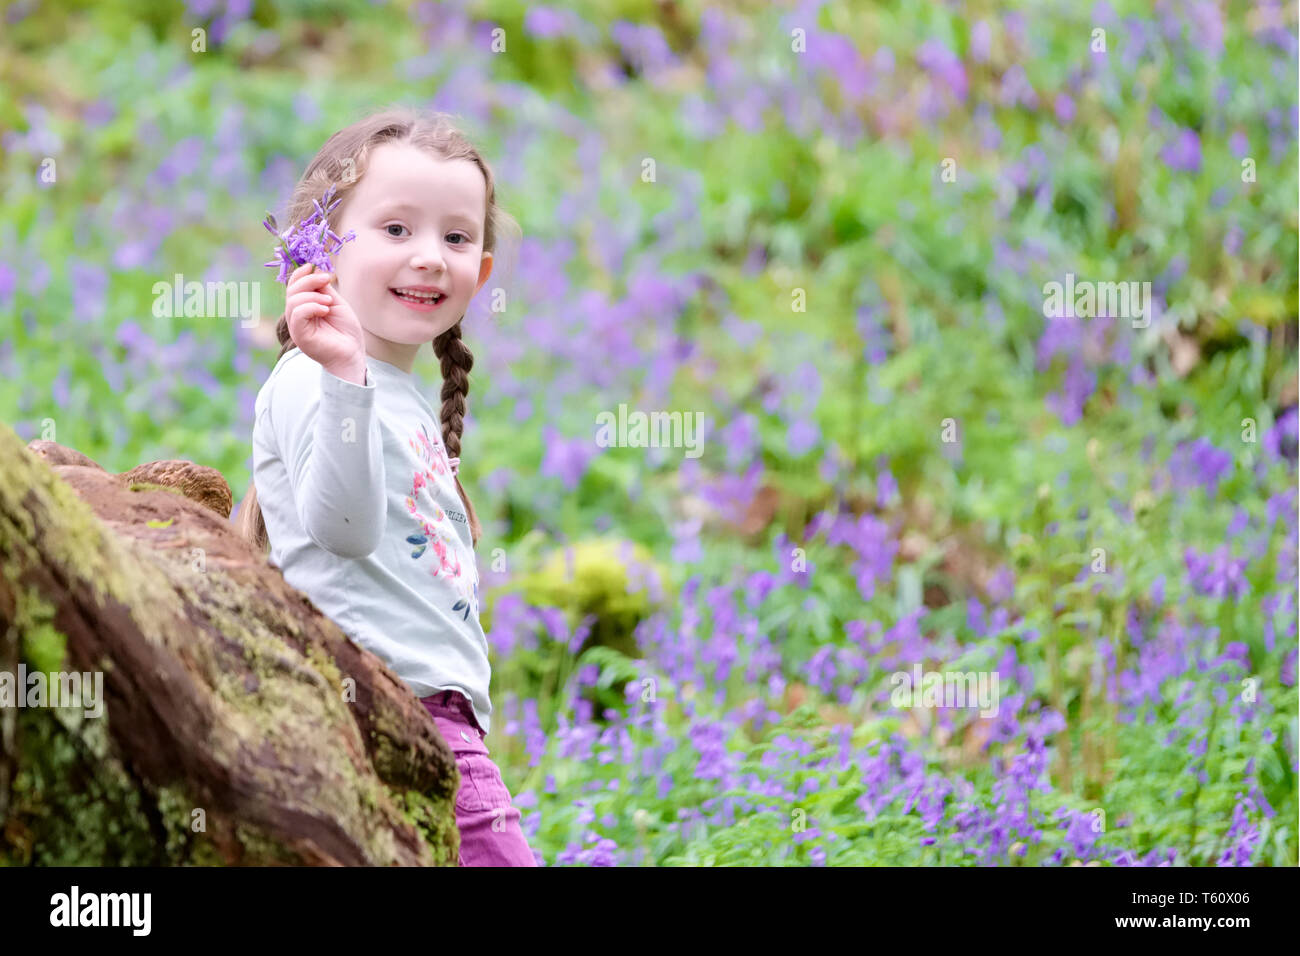 Young girl picking bluebell flowers outside in spring summer forest woodland Stock Photo